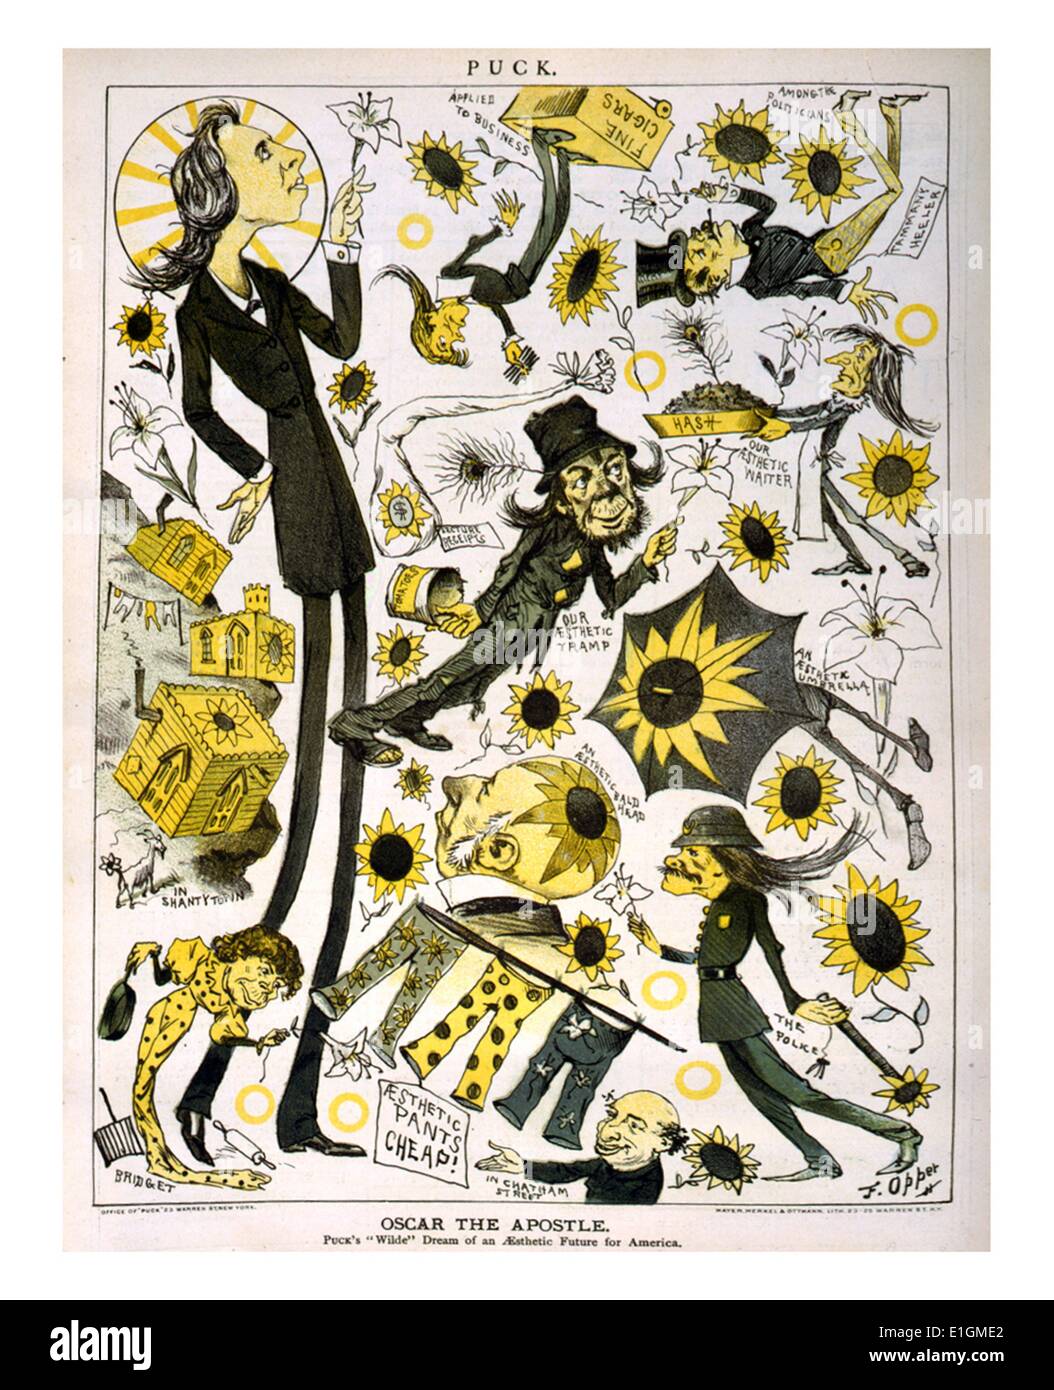 Oscar the apostle. Puck's 'Wilde' dream of an aesthetic future for America by Frederick Burr Opper,  1857-1937, artist Published: 1882. Cartoon showing Oscar Wilde, with people and things dealing with aesthetics Stock Photo